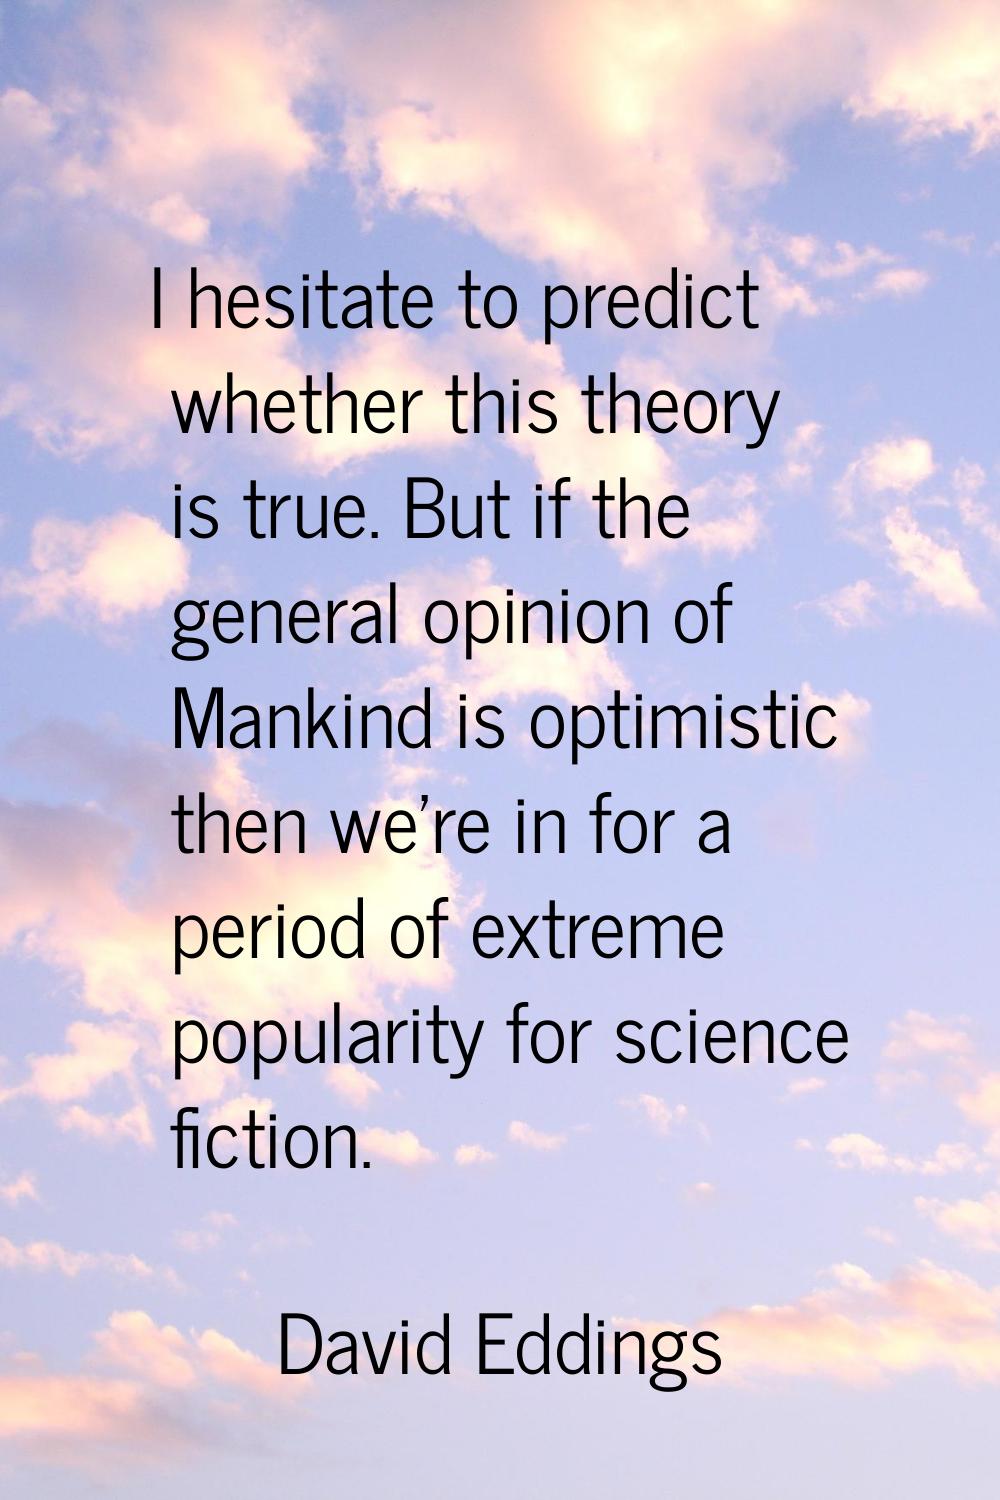 I hesitate to predict whether this theory is true. But if the general opinion of Mankind is optimis